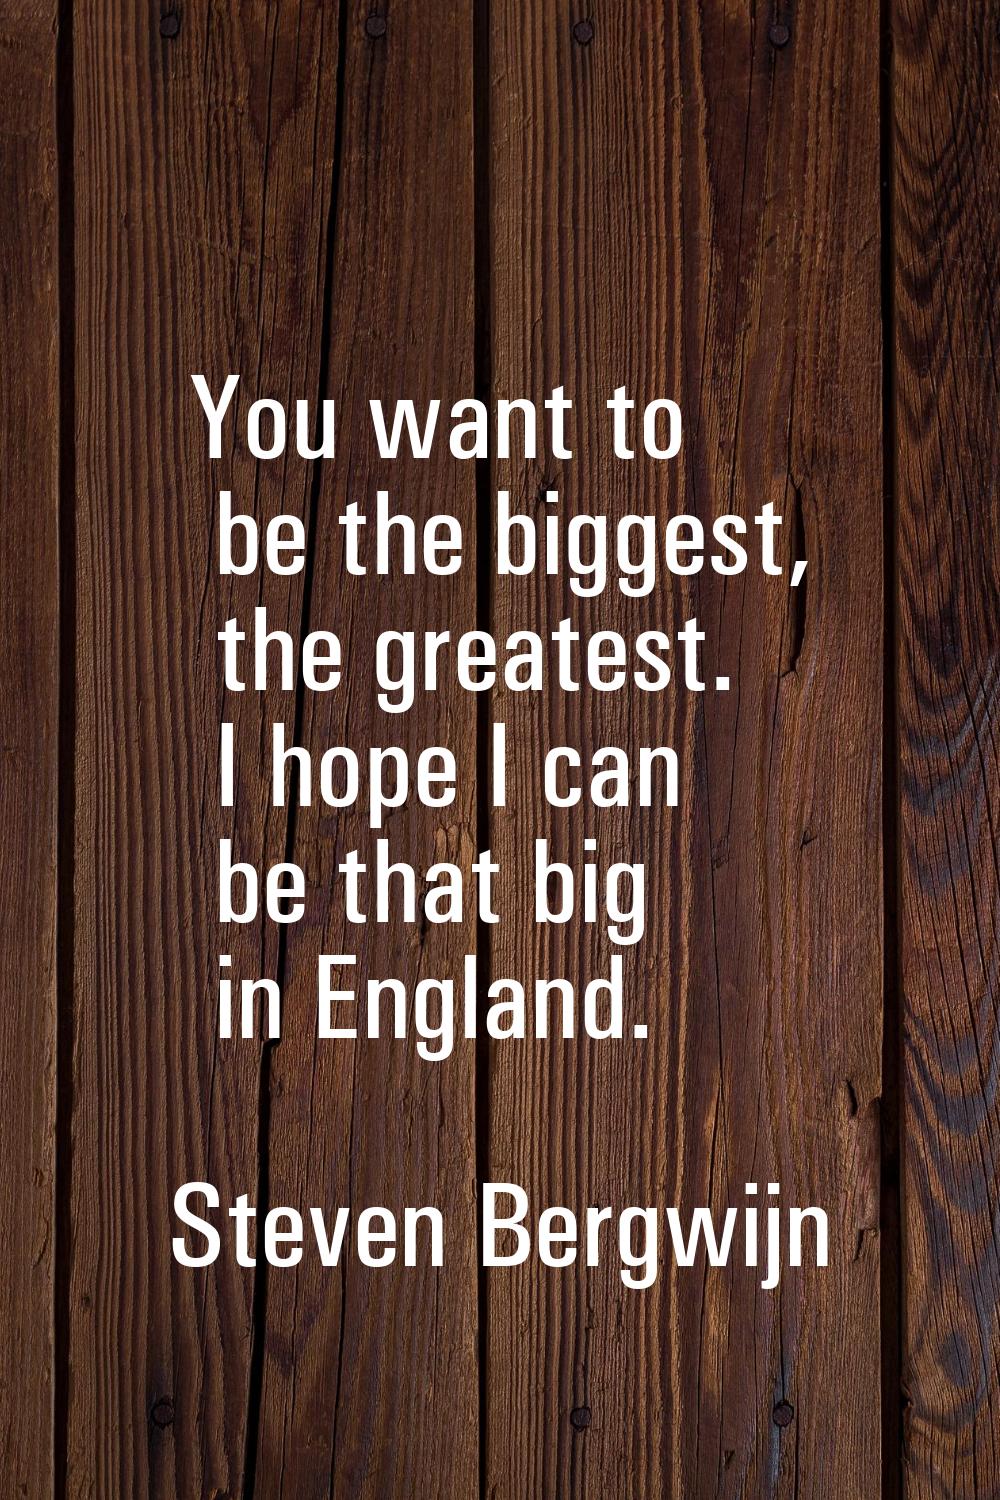 You want to be the biggest, the greatest. I hope I can be that big in England.